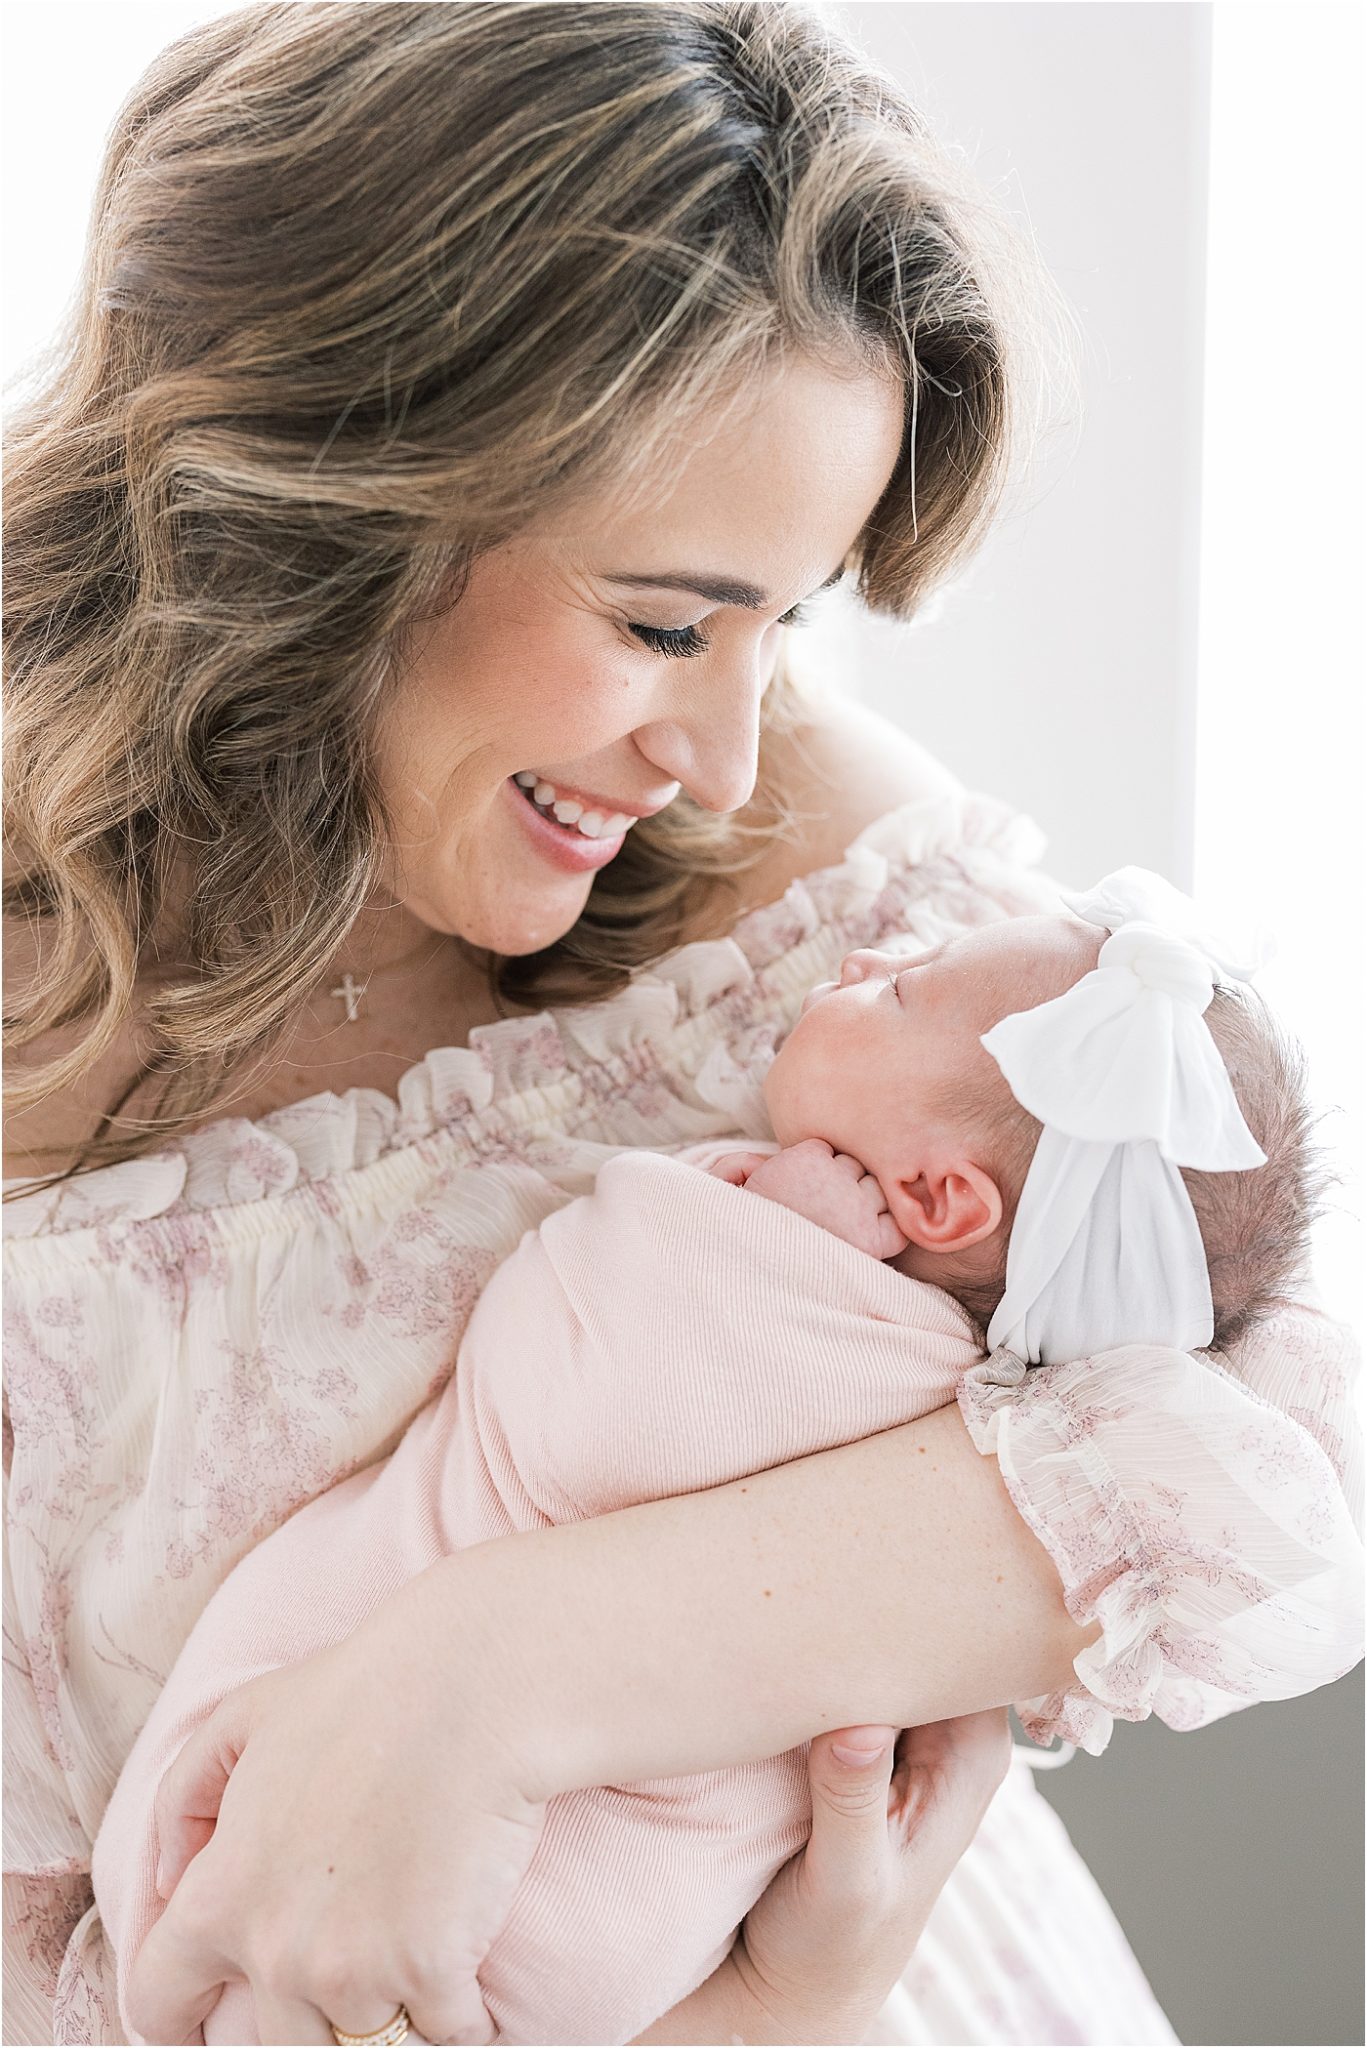 Mom holding baby girl in home for lifestyle newborn session | Lindsay Konopa Photography